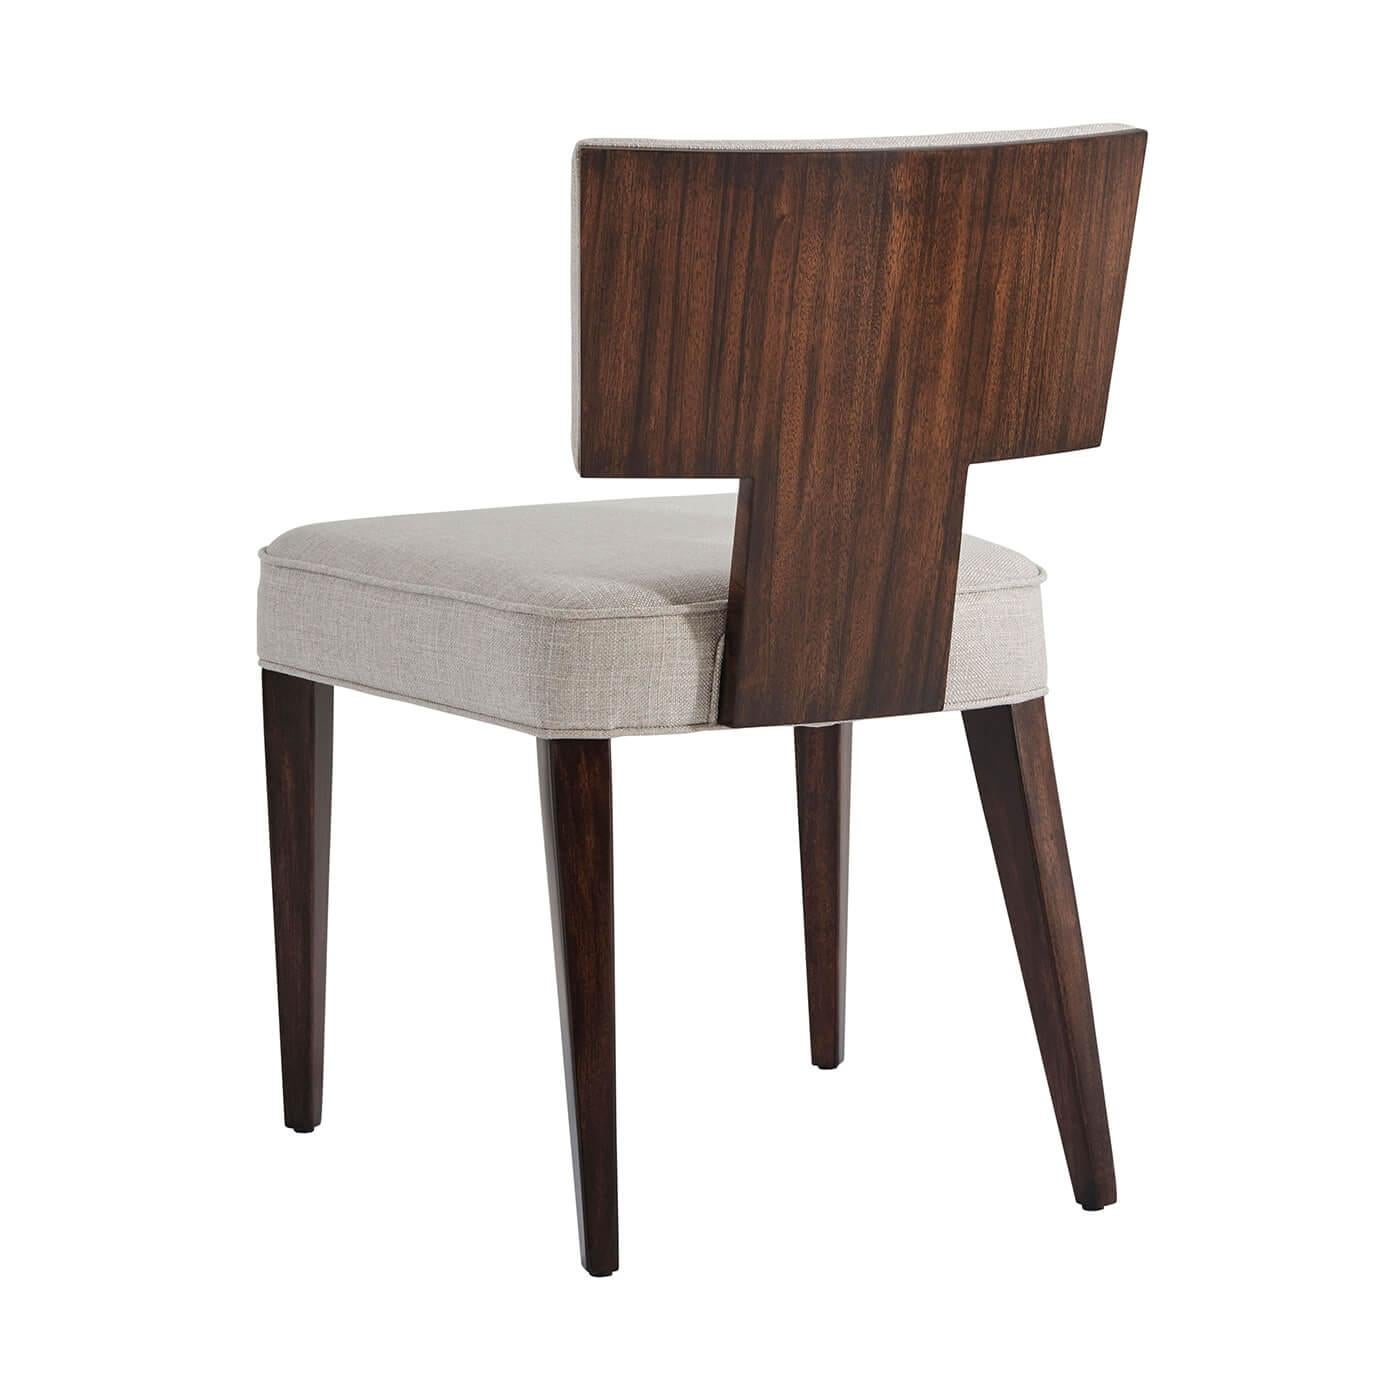 A fine Art Deco style dining chair with Pacific Walnut veneer and mahogany, with an upholstered seat and backrest and with a veered and finished reverse.

Dimensions: 21.5